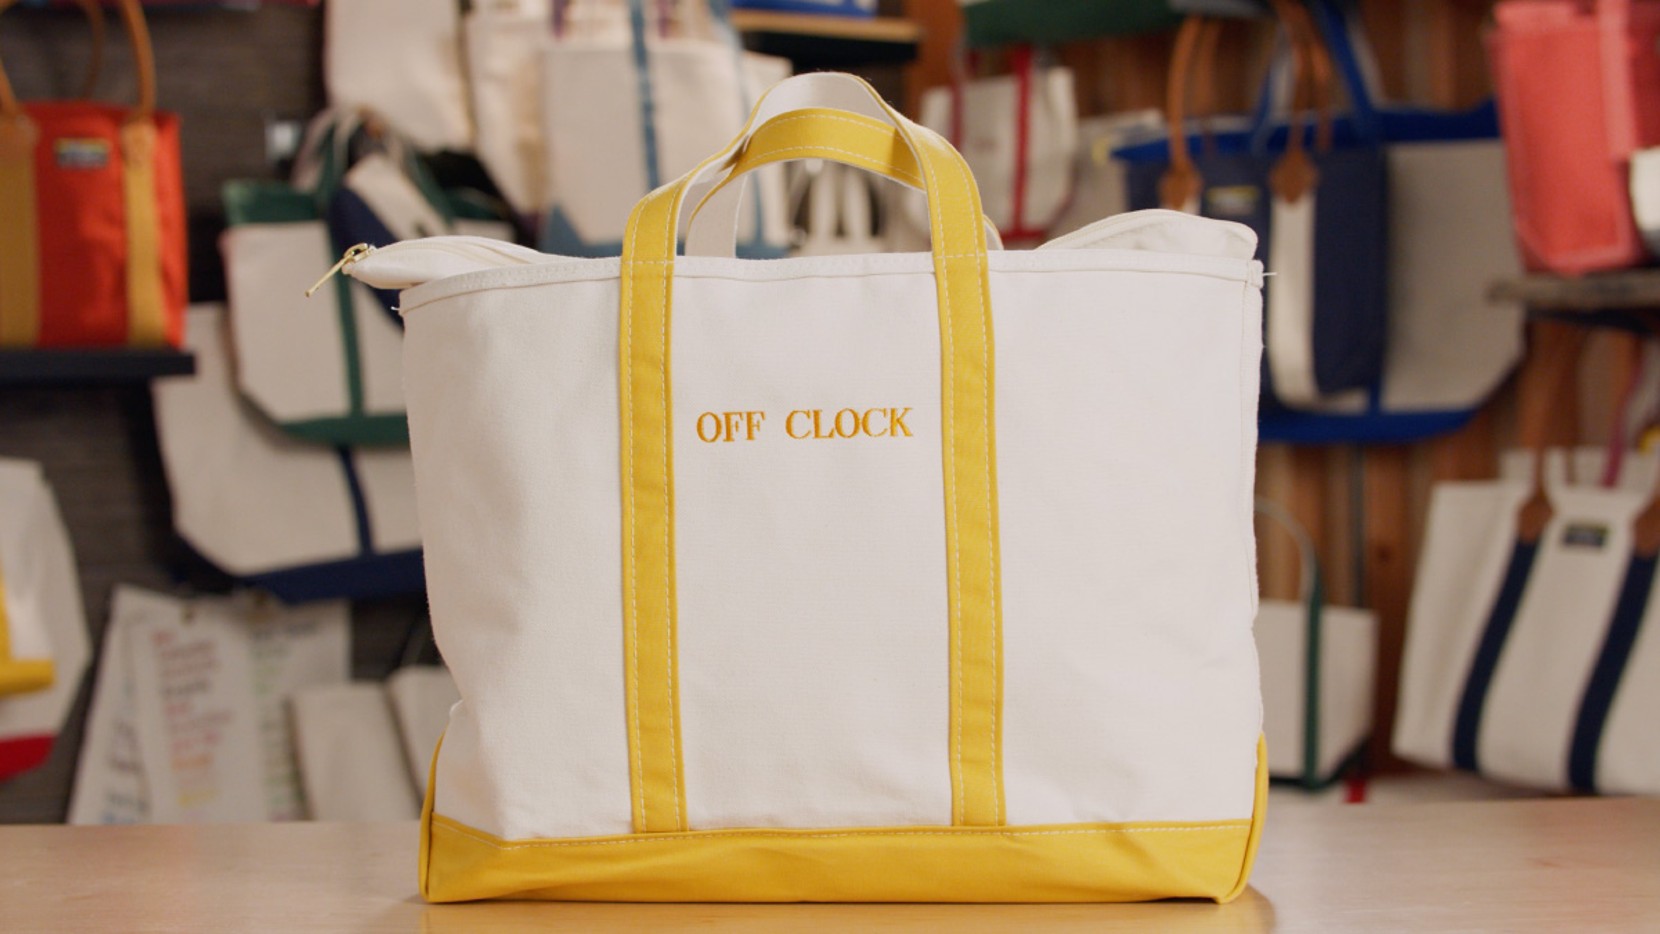 A large zip-top Boat & Tote with yellow handles and monogram - "OFF CLOCK"